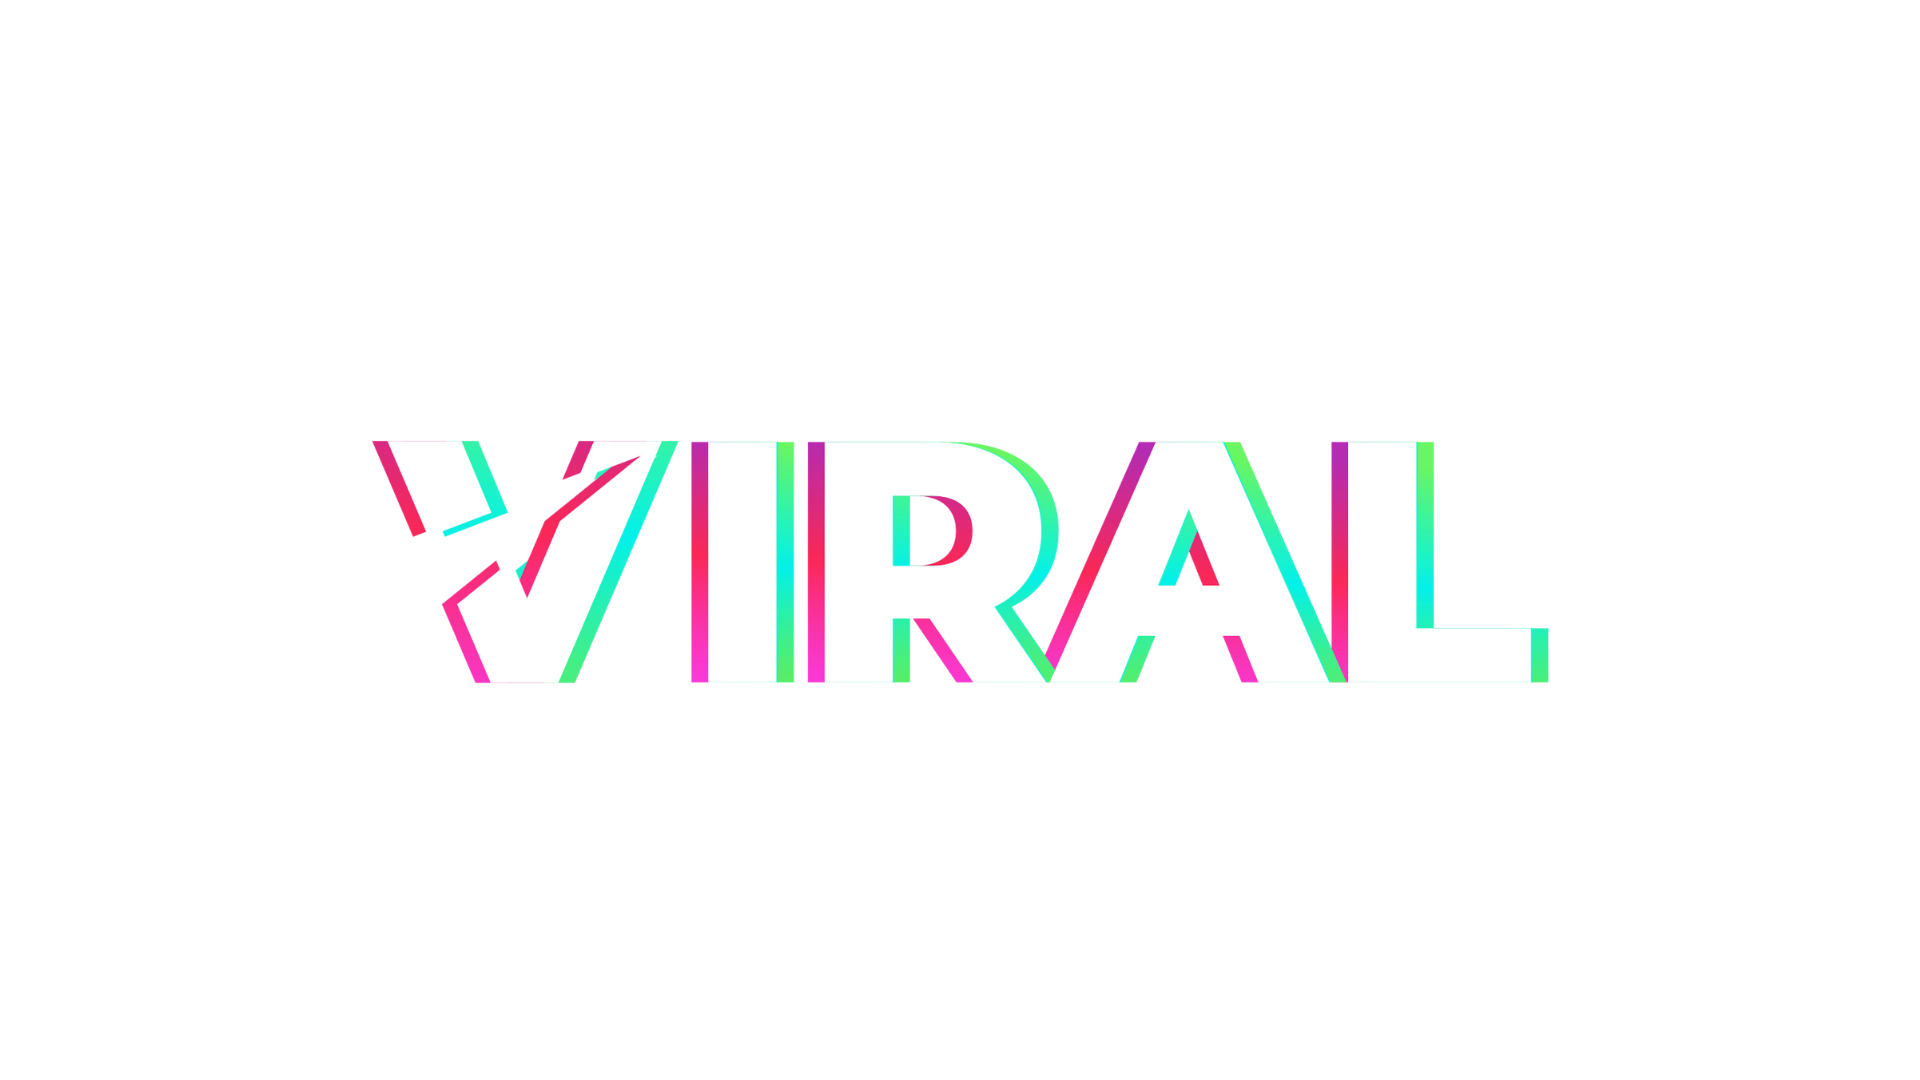 The Viral App